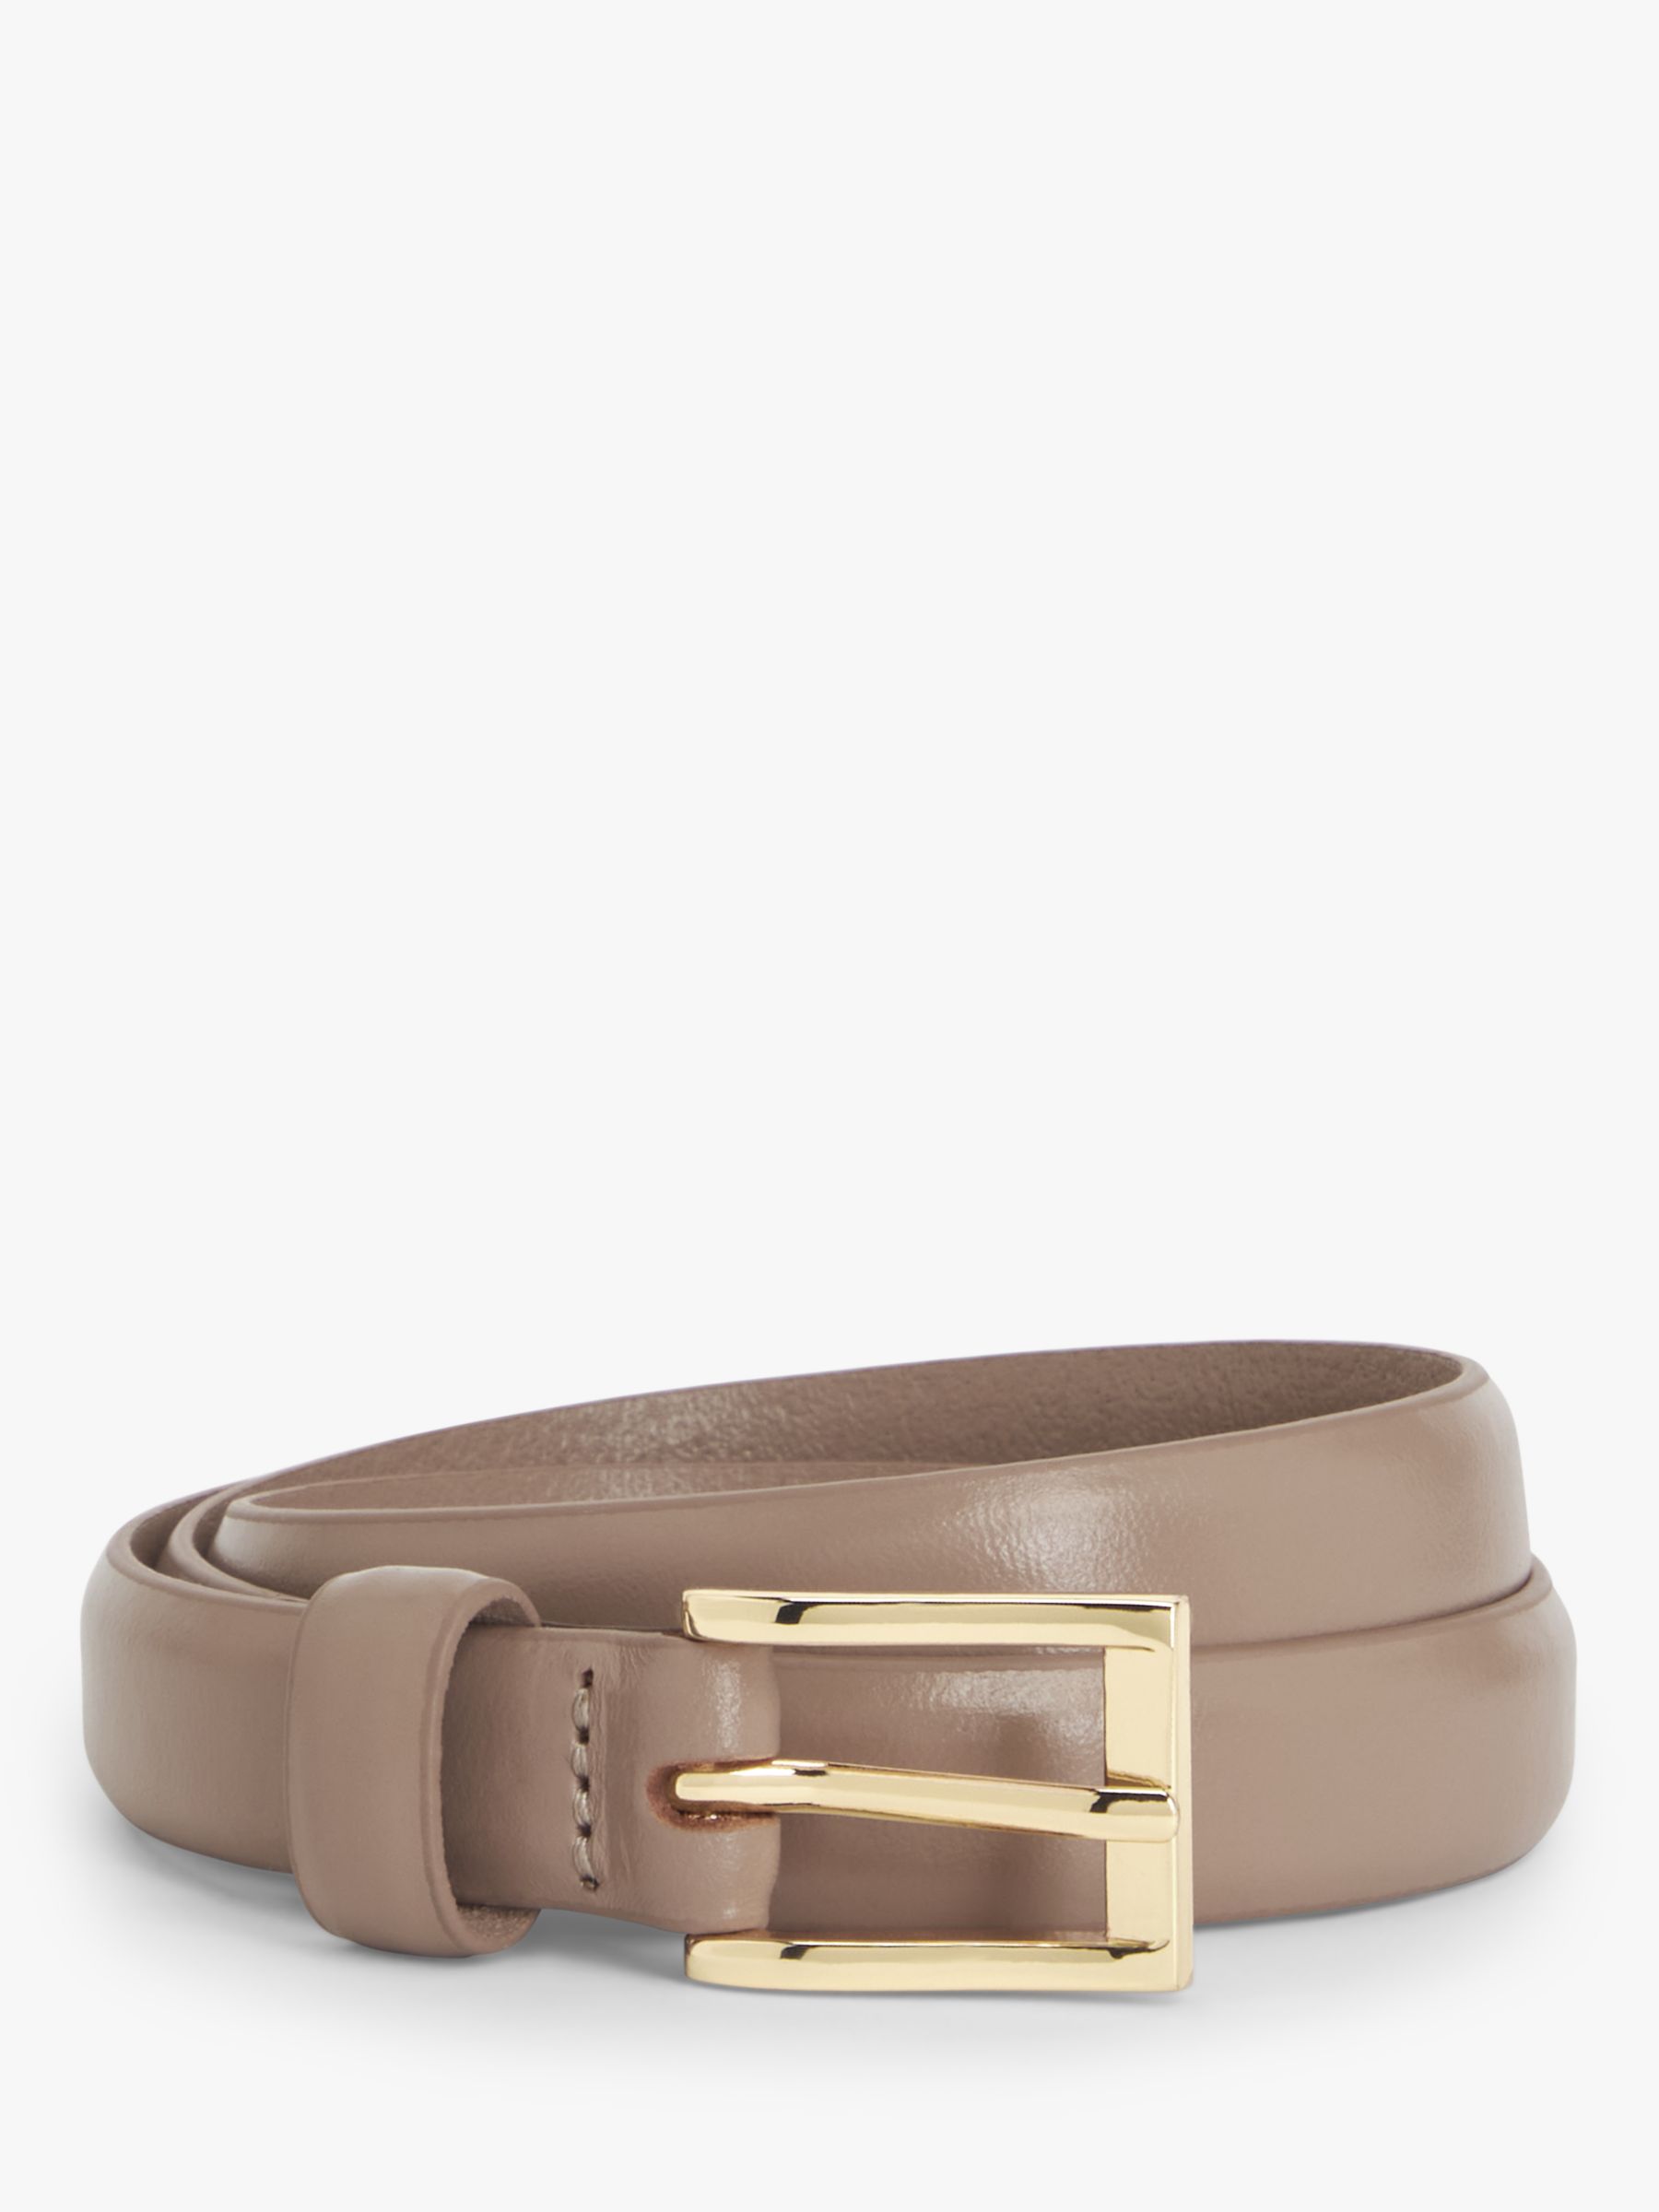 John Lewis Narrow Buckle Leather Belt, Taupe, M